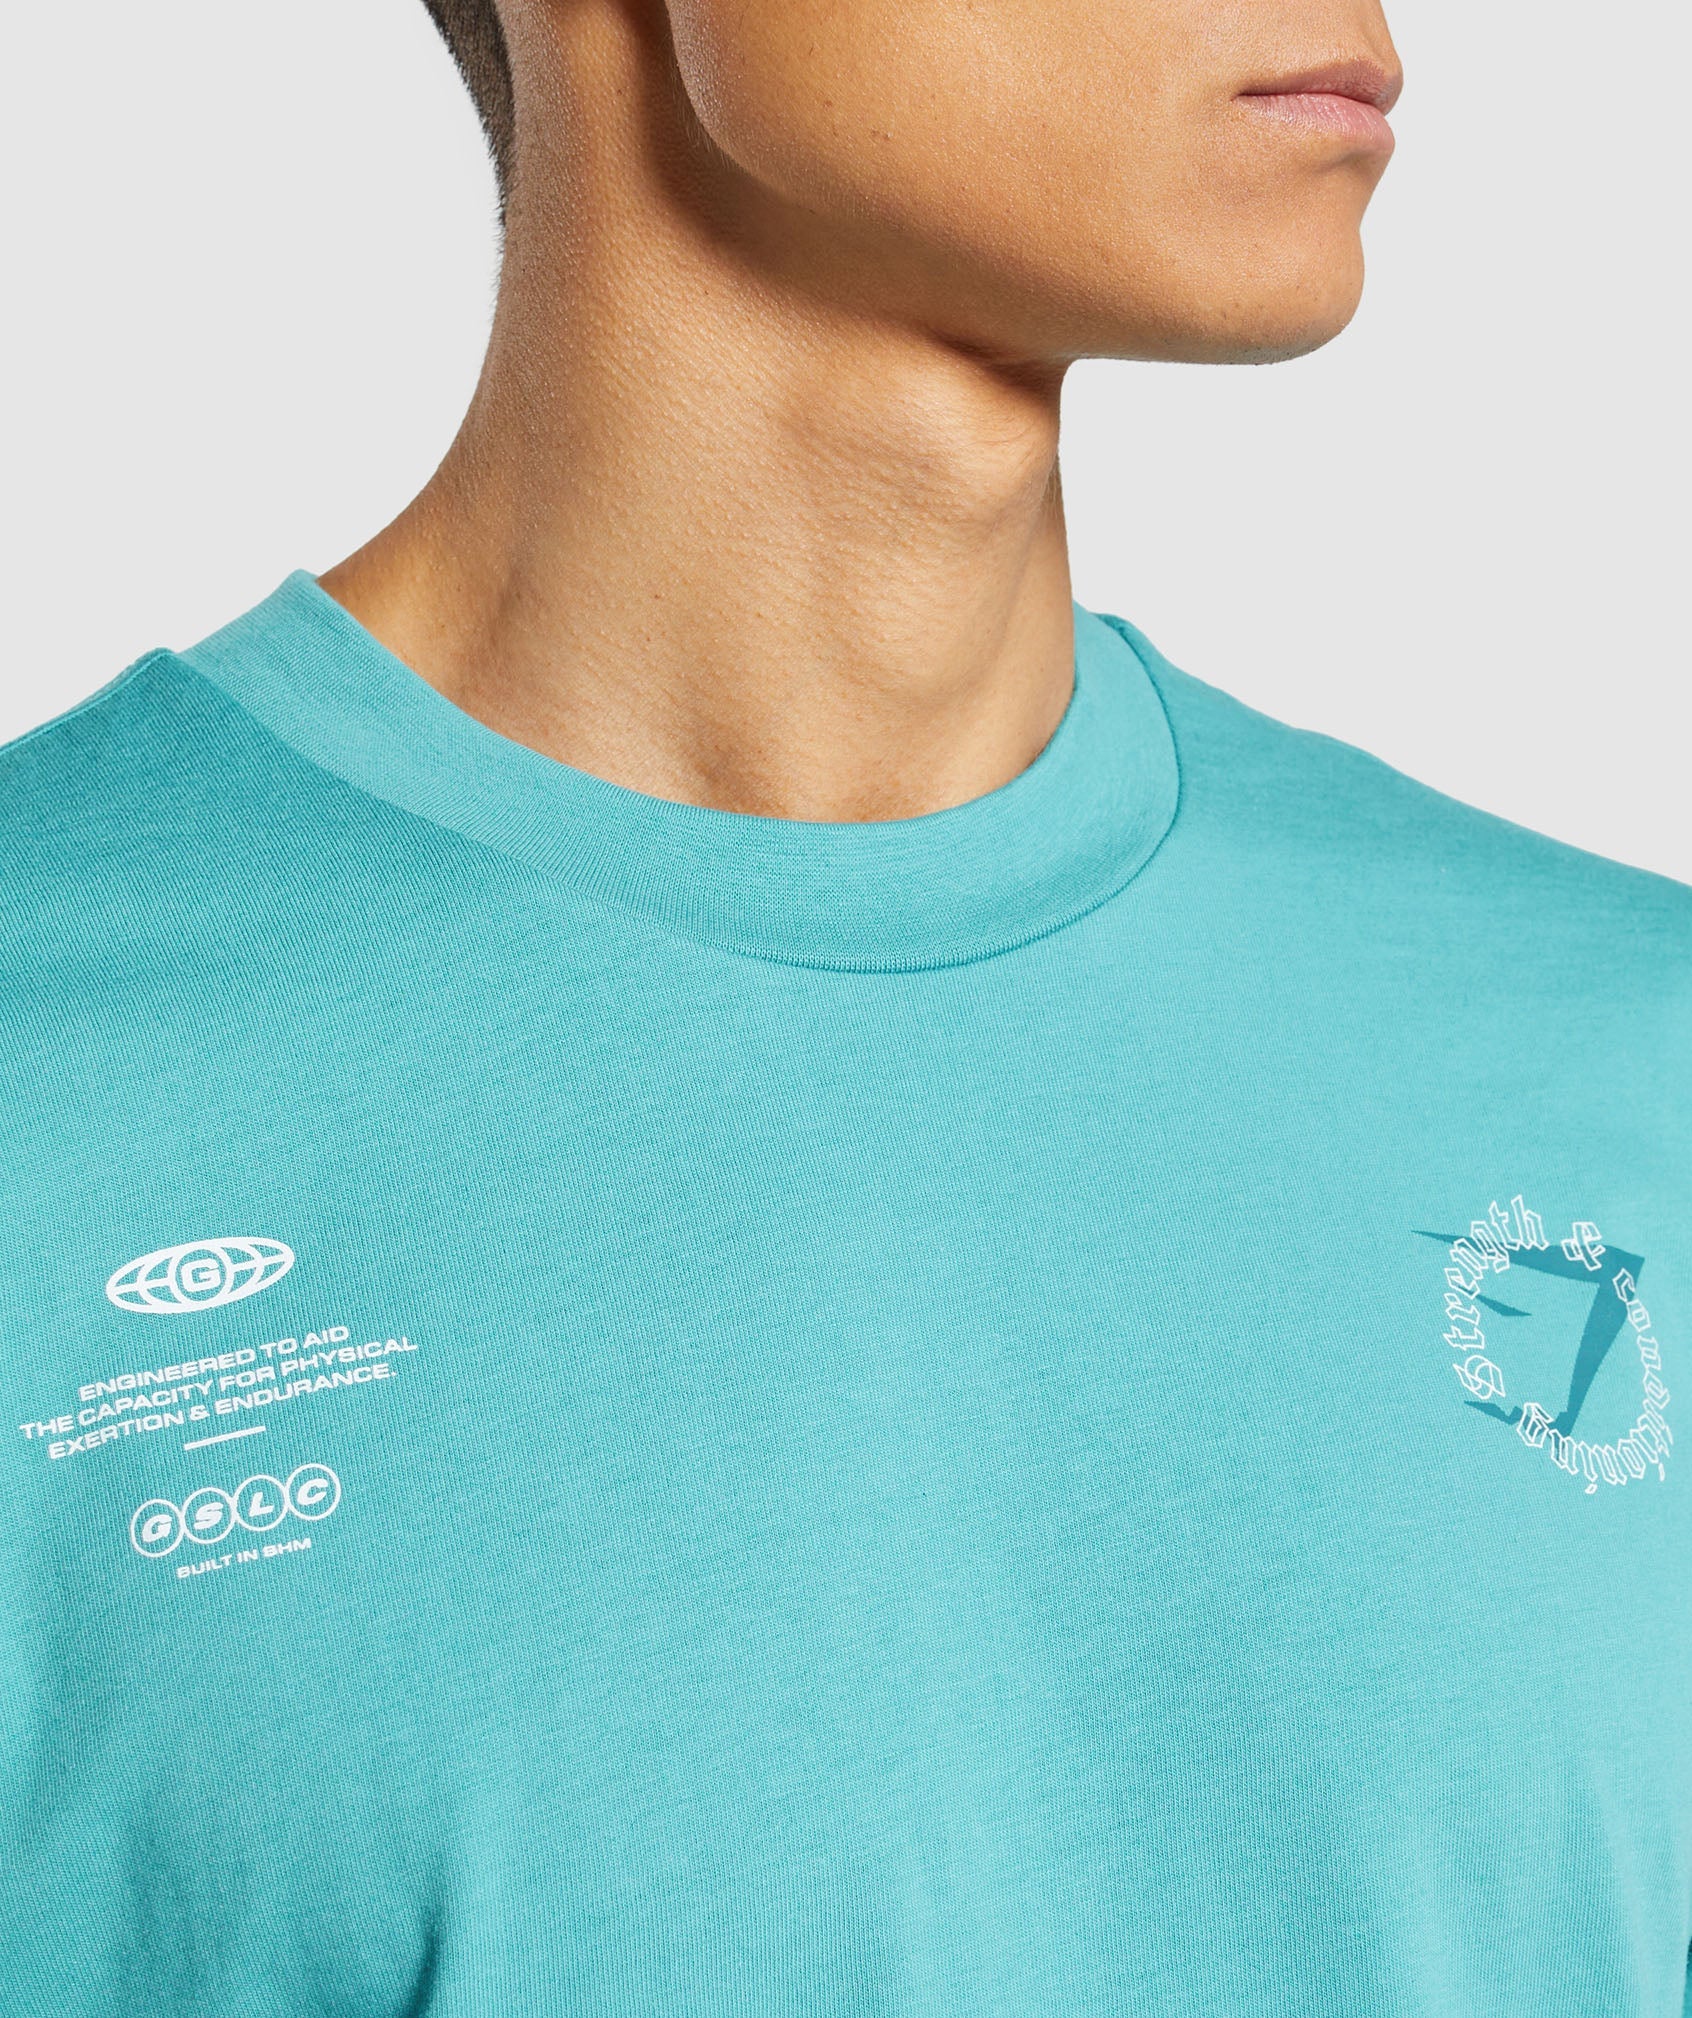 Strength and Conditioning Long Sleeve T-Shirt in Artificial Teal - view 6